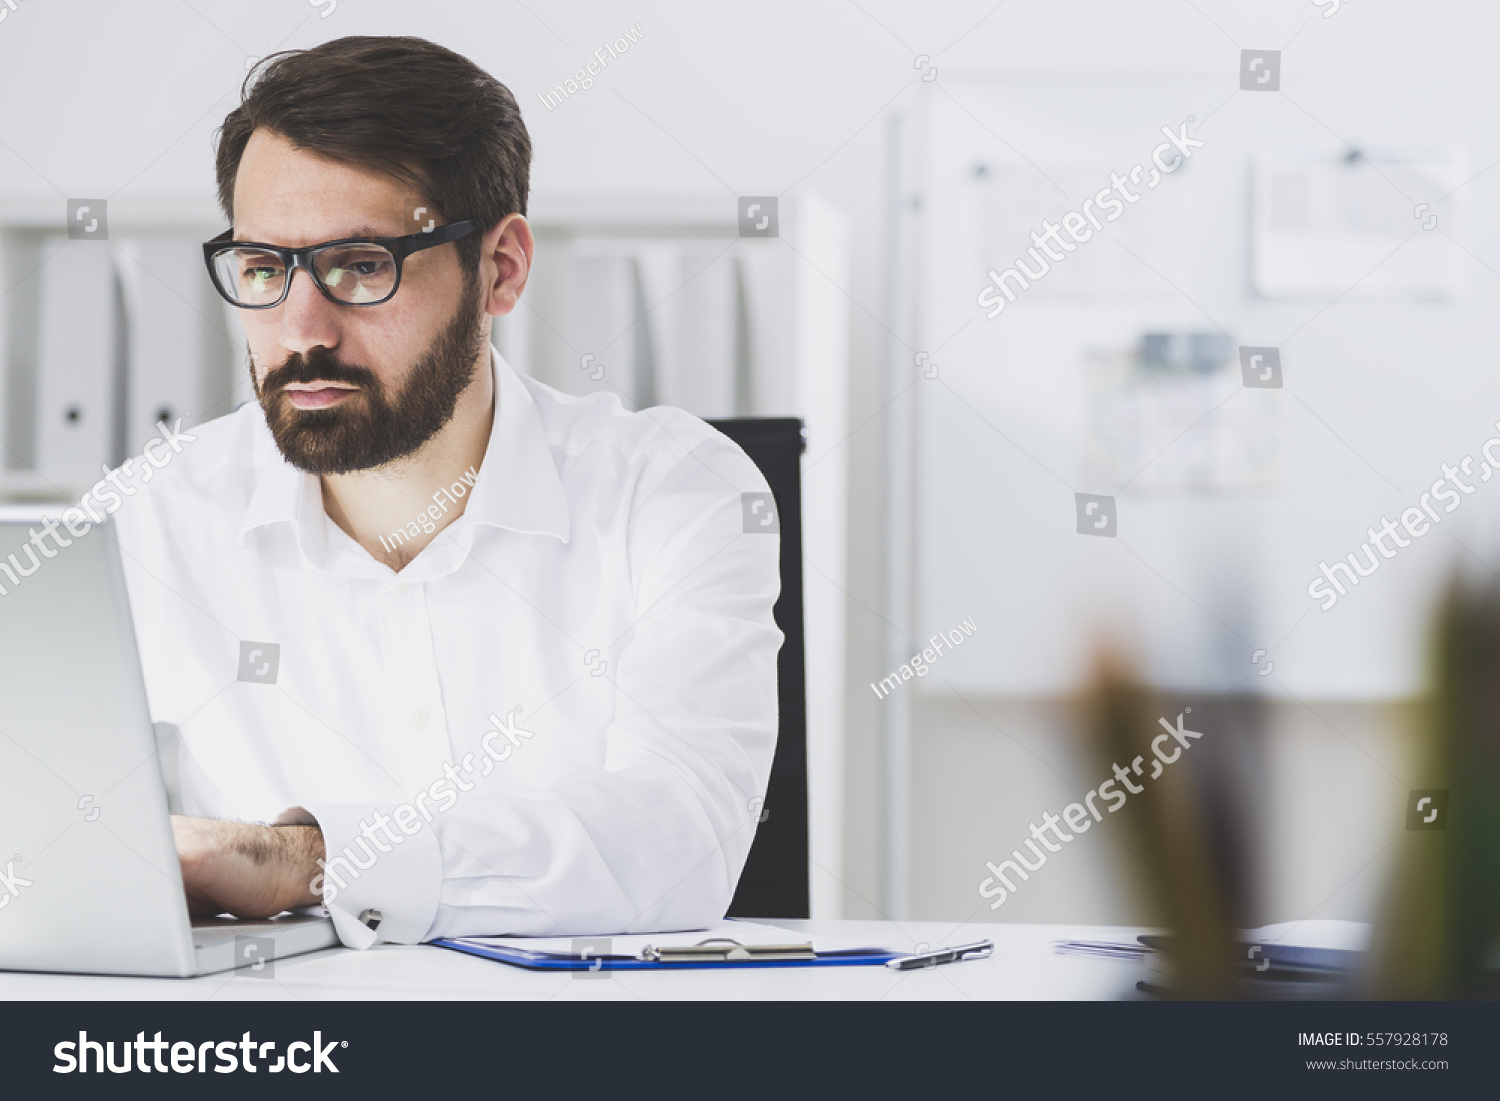 Close up of a bearded businessman wearing glasses and sitting at his laptop and typing. There is a whiteboard and a bookcase in the background. #557928178